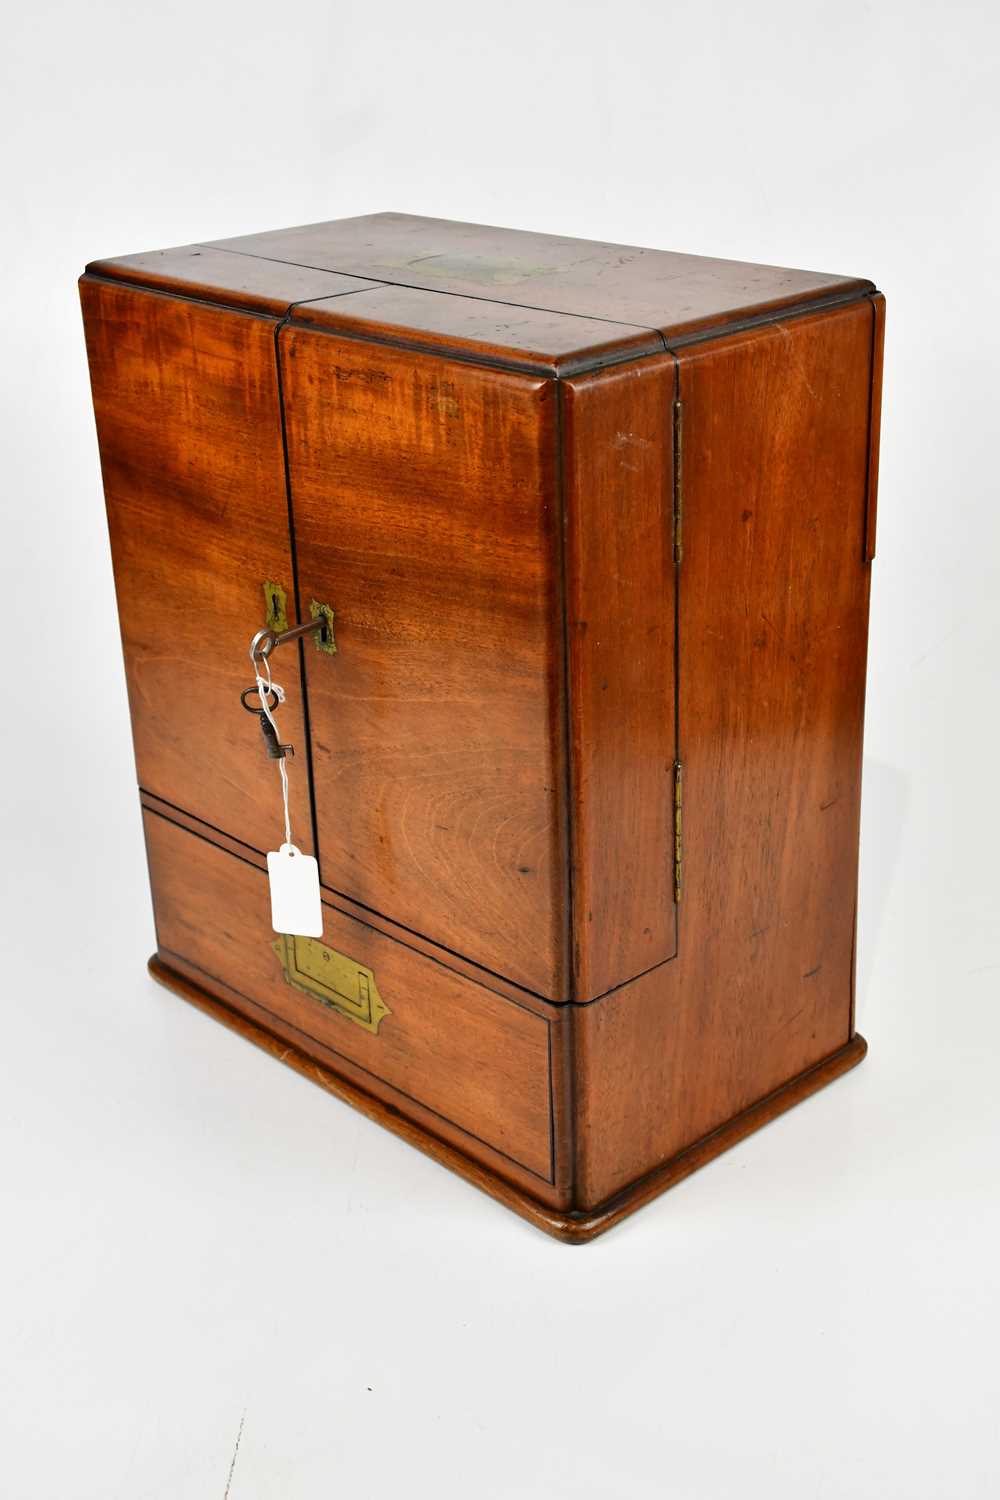 A Regency mahogany apothecary cabinet, the pair of doors enclosing an arrangement of bottles and - Image 5 of 5